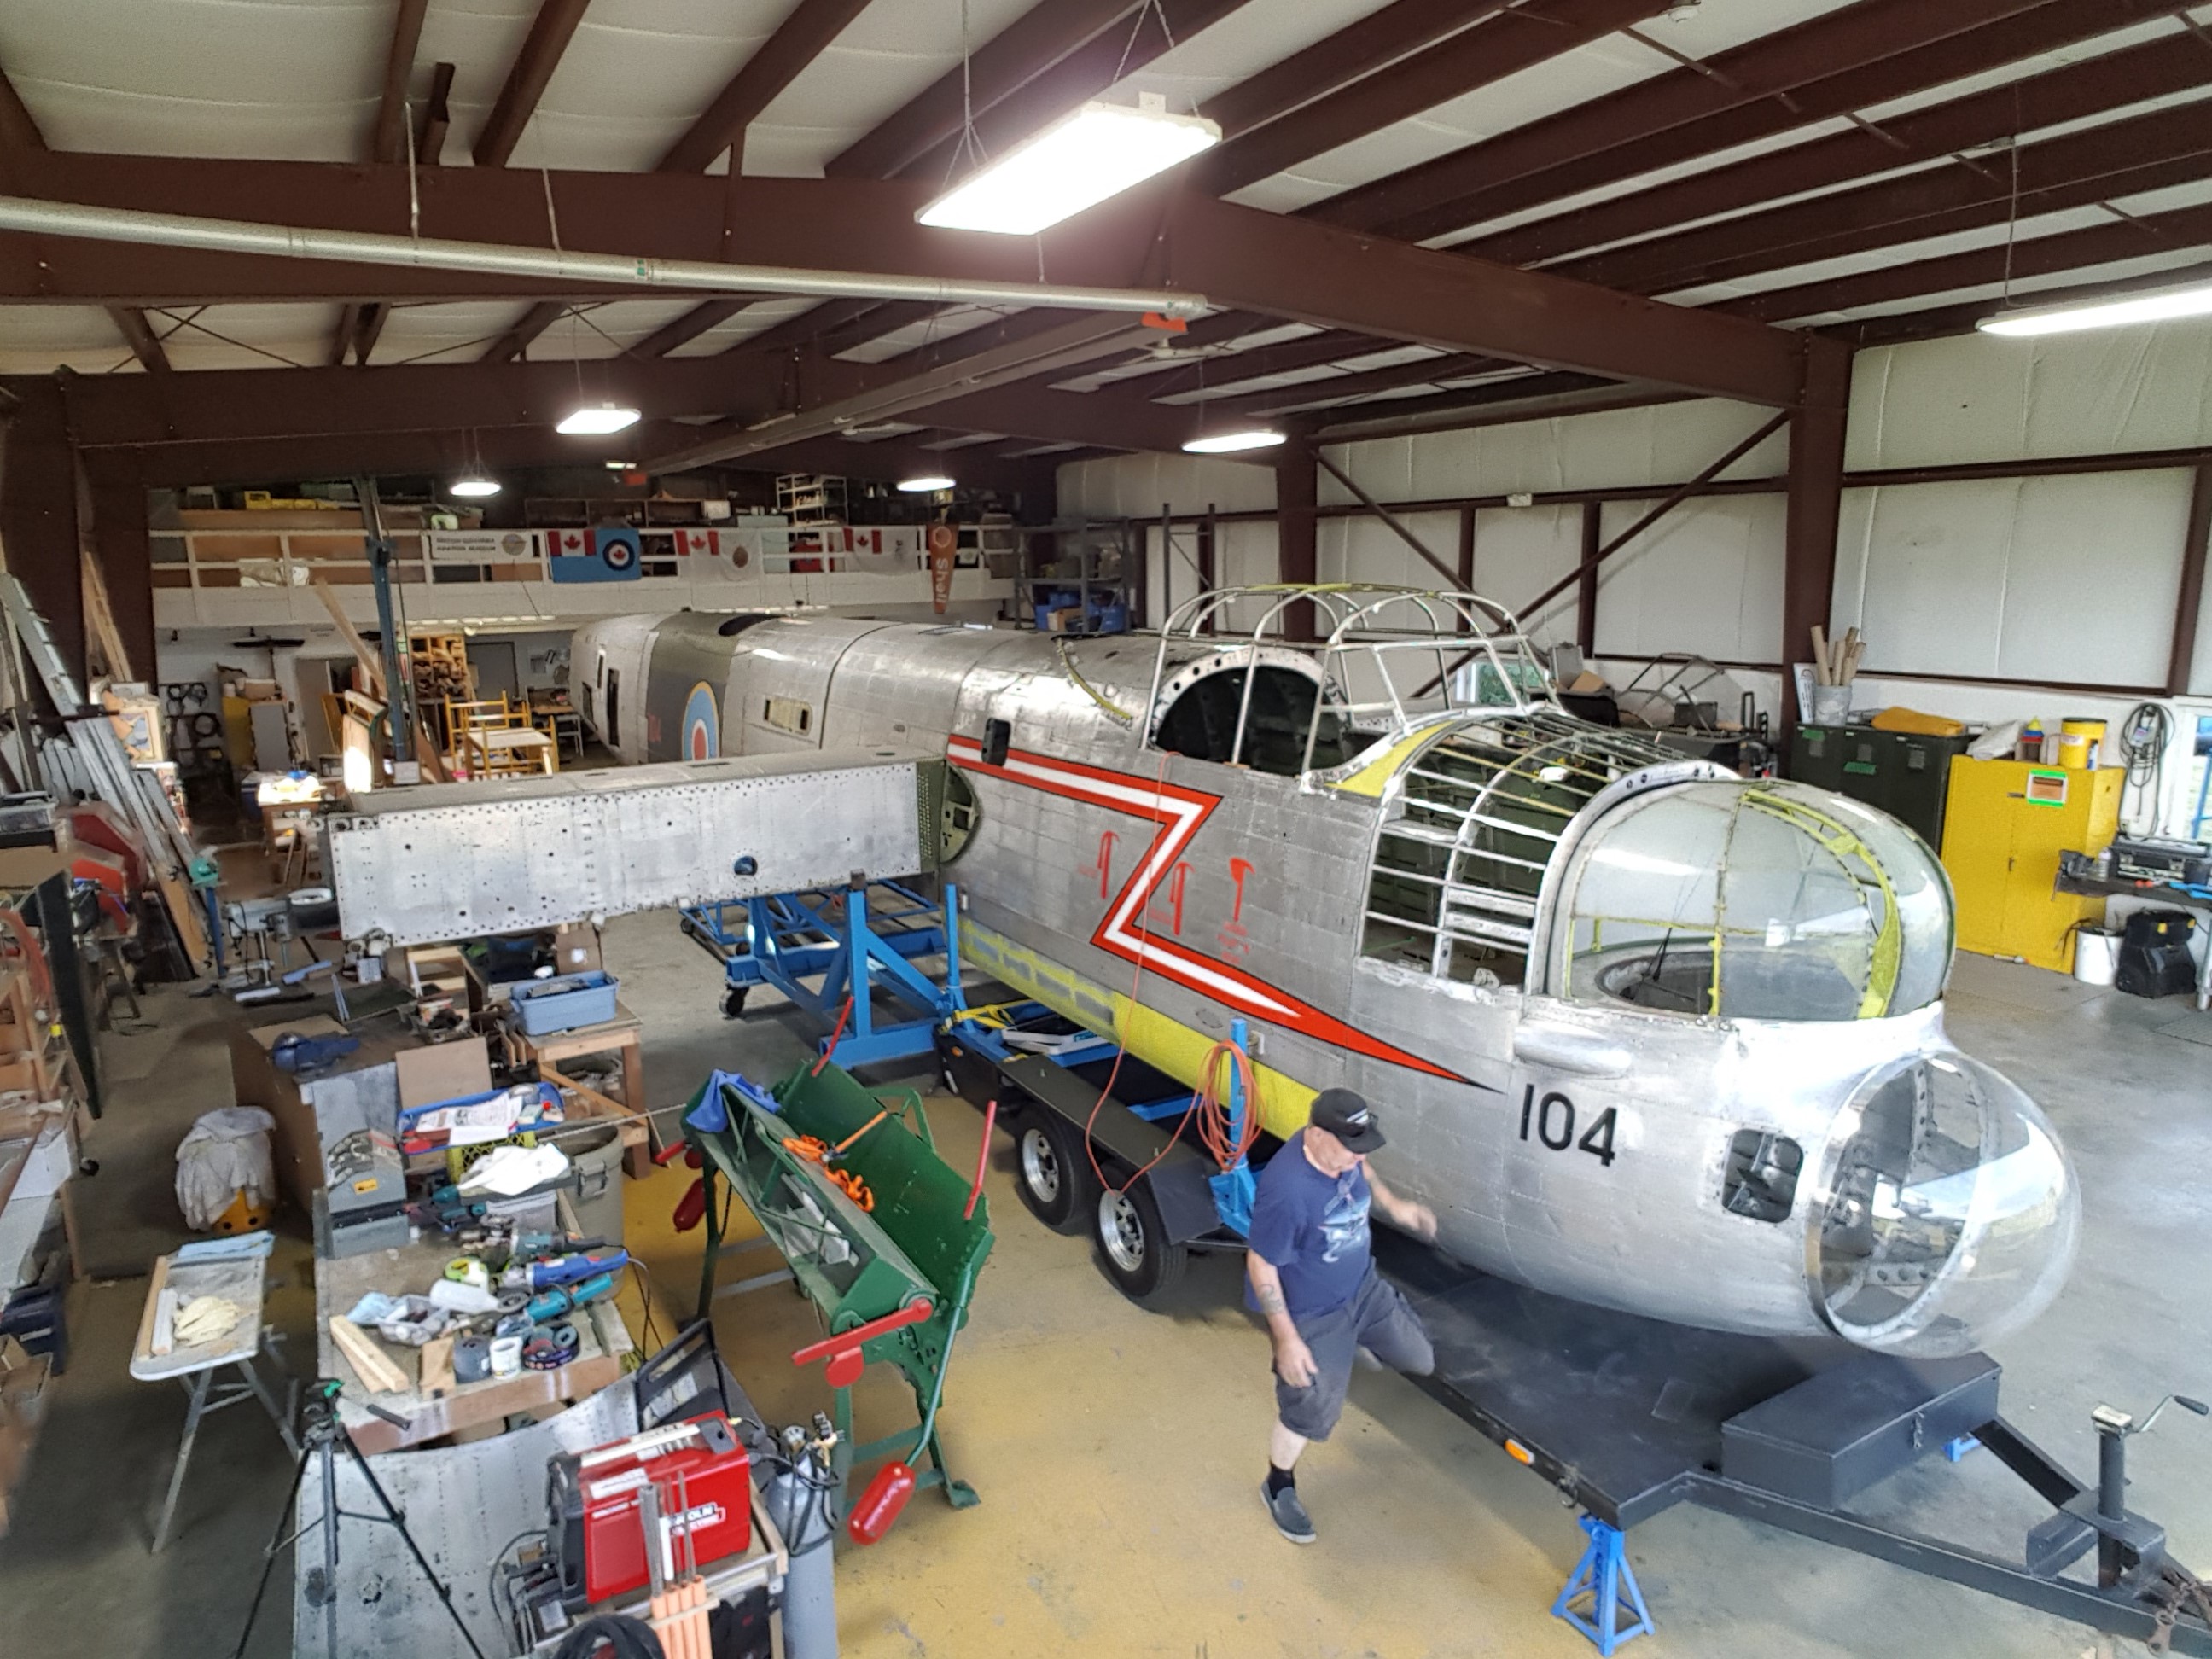 The nose and cockpit section of FM104 were carefully secured to a trailer in spring 2019 to highlight the restoration project at local parades and events. Grant Hopkins Photo